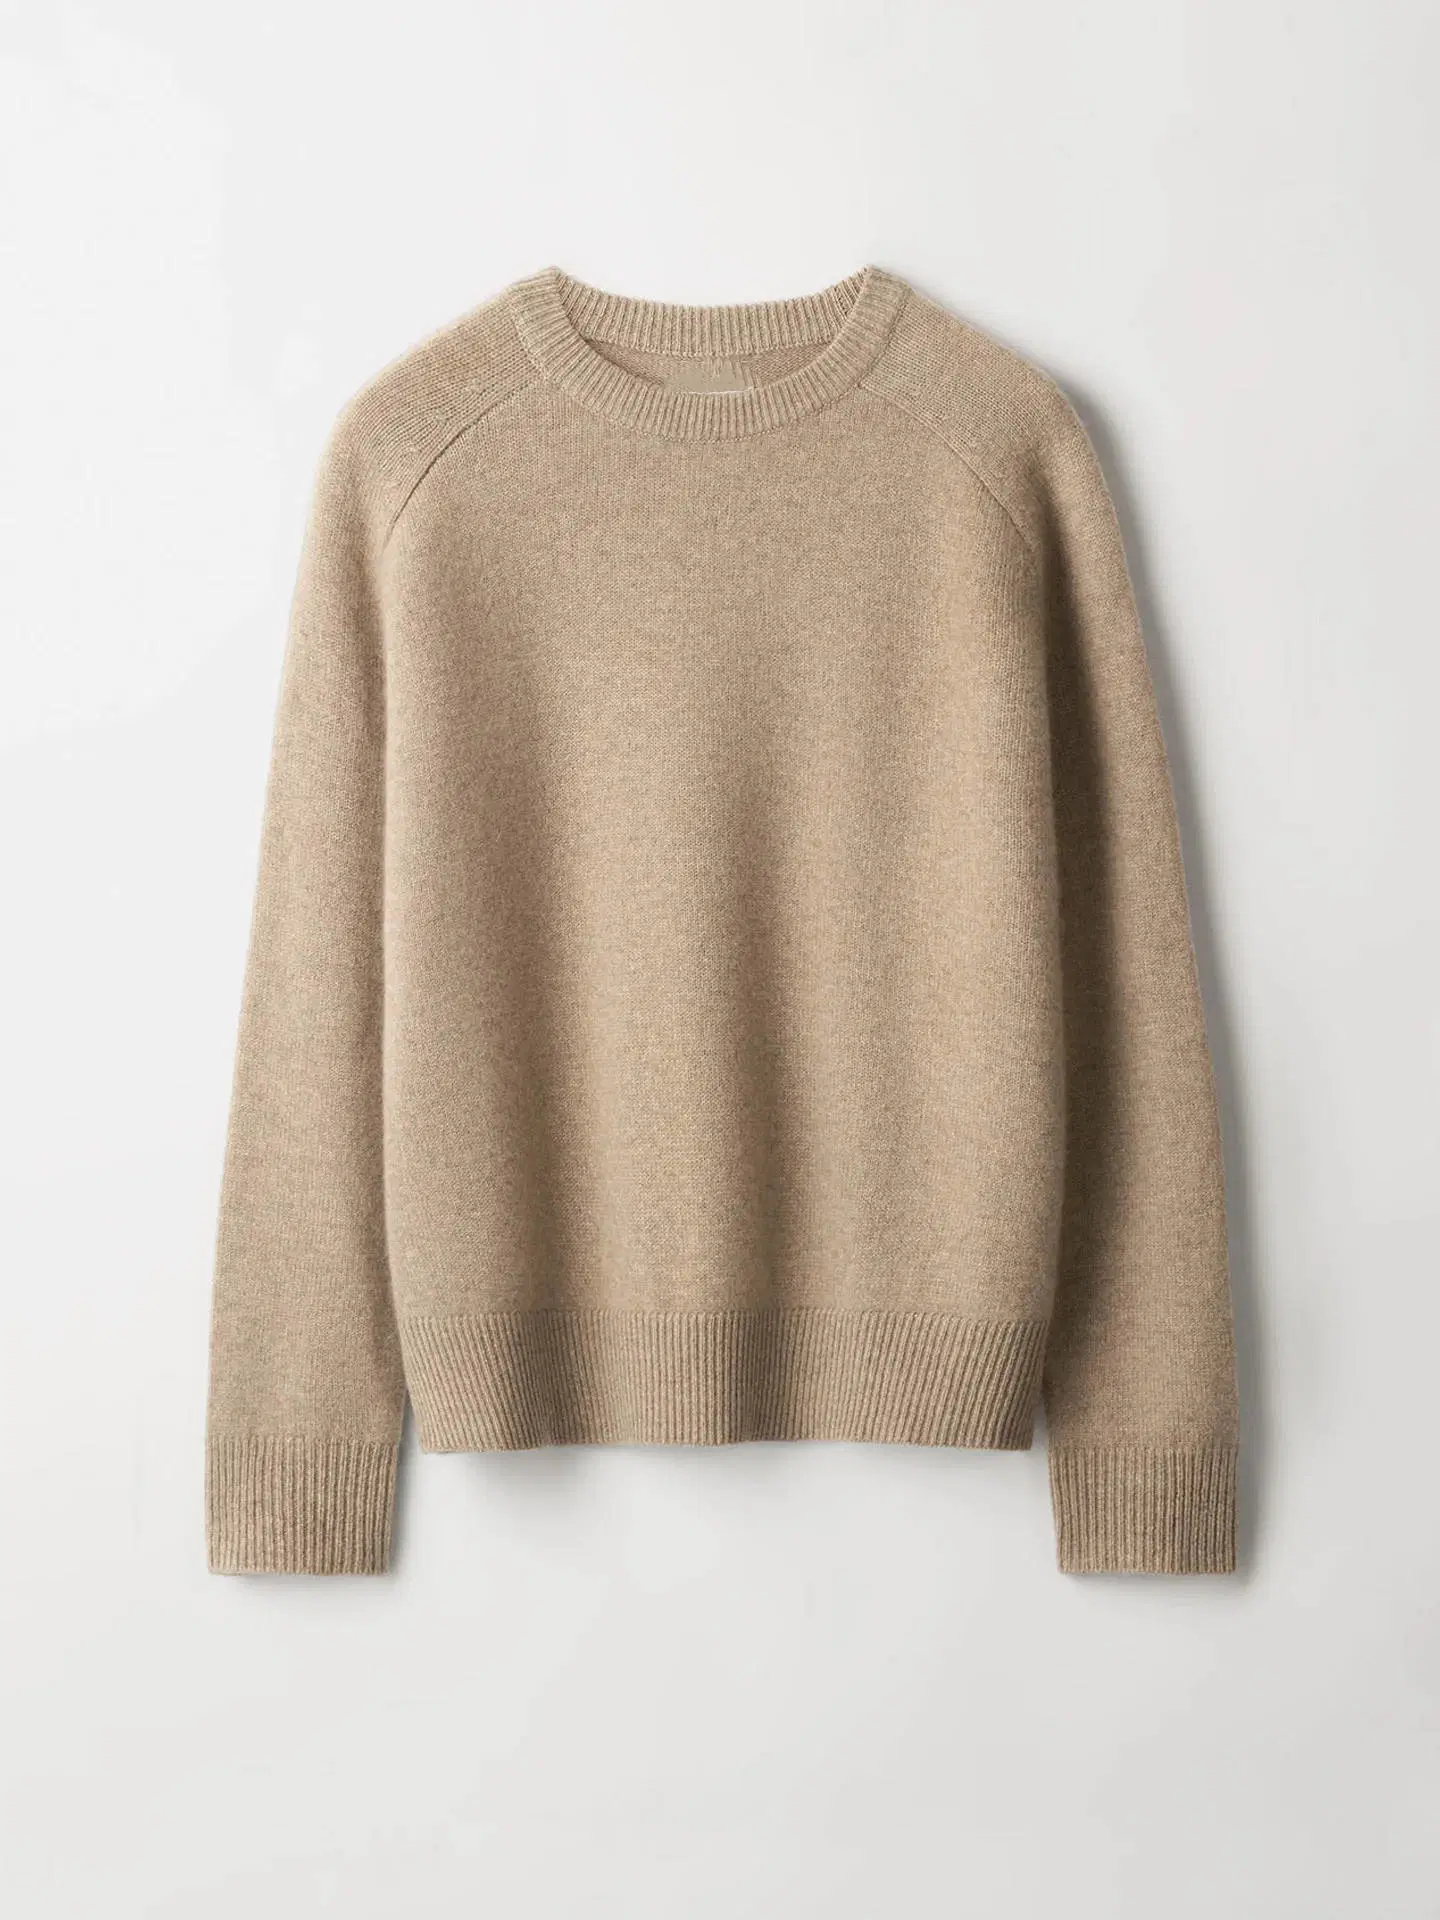 Washable Knit Soft Crew Neck 100% Cashmere Sweater Tops Pullover for Women